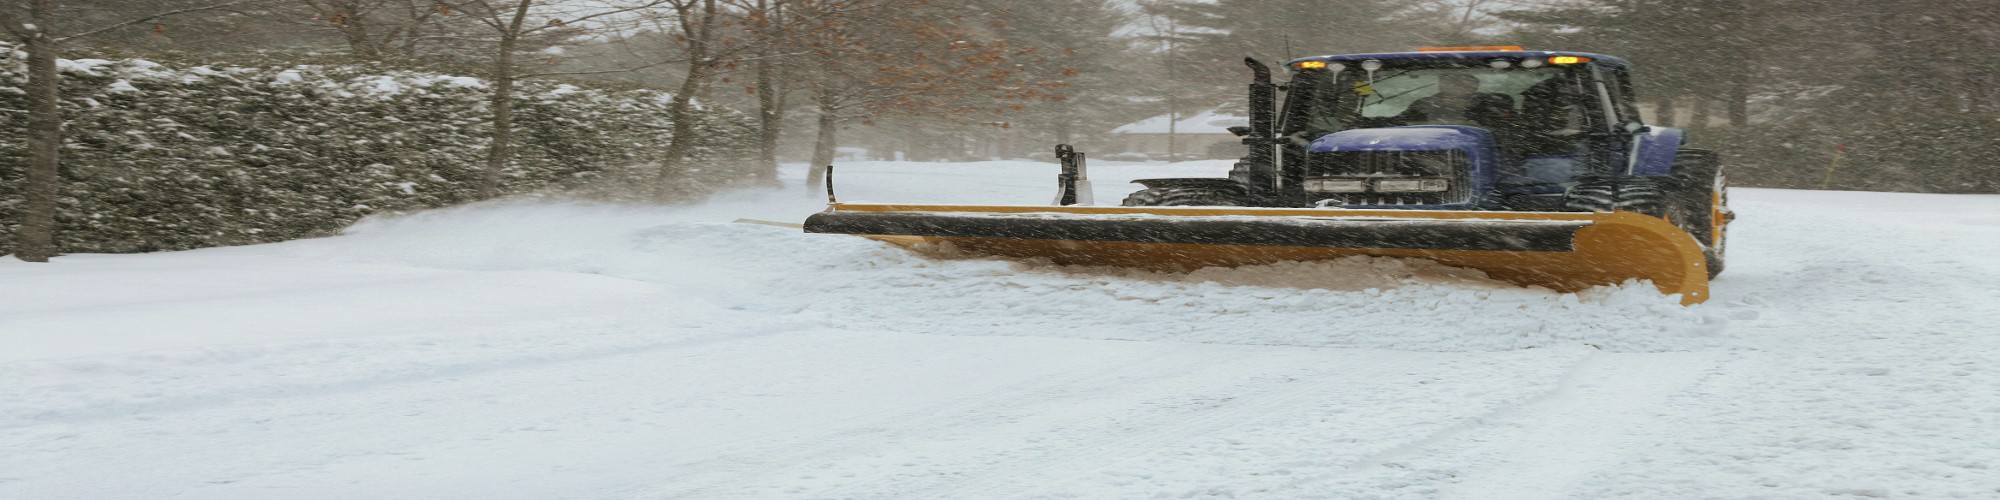 Snow Removal Services in Tacoma